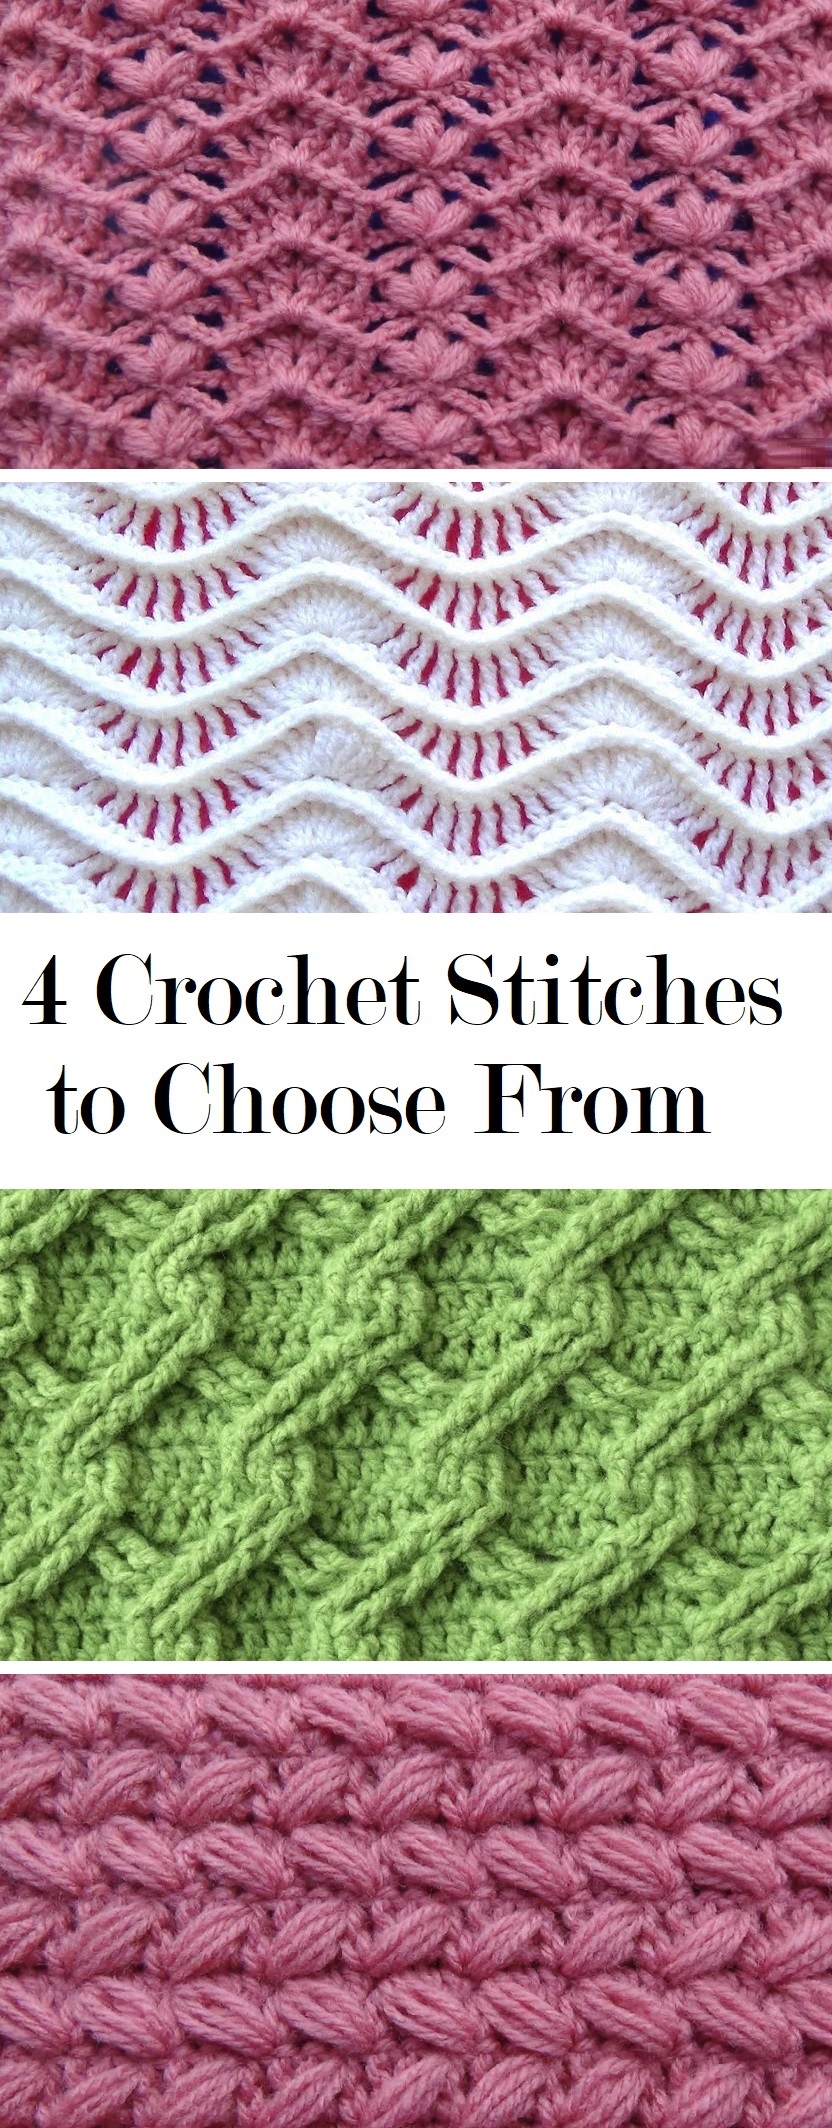 4 Crochet Stitches to Learn - Tutorials & More